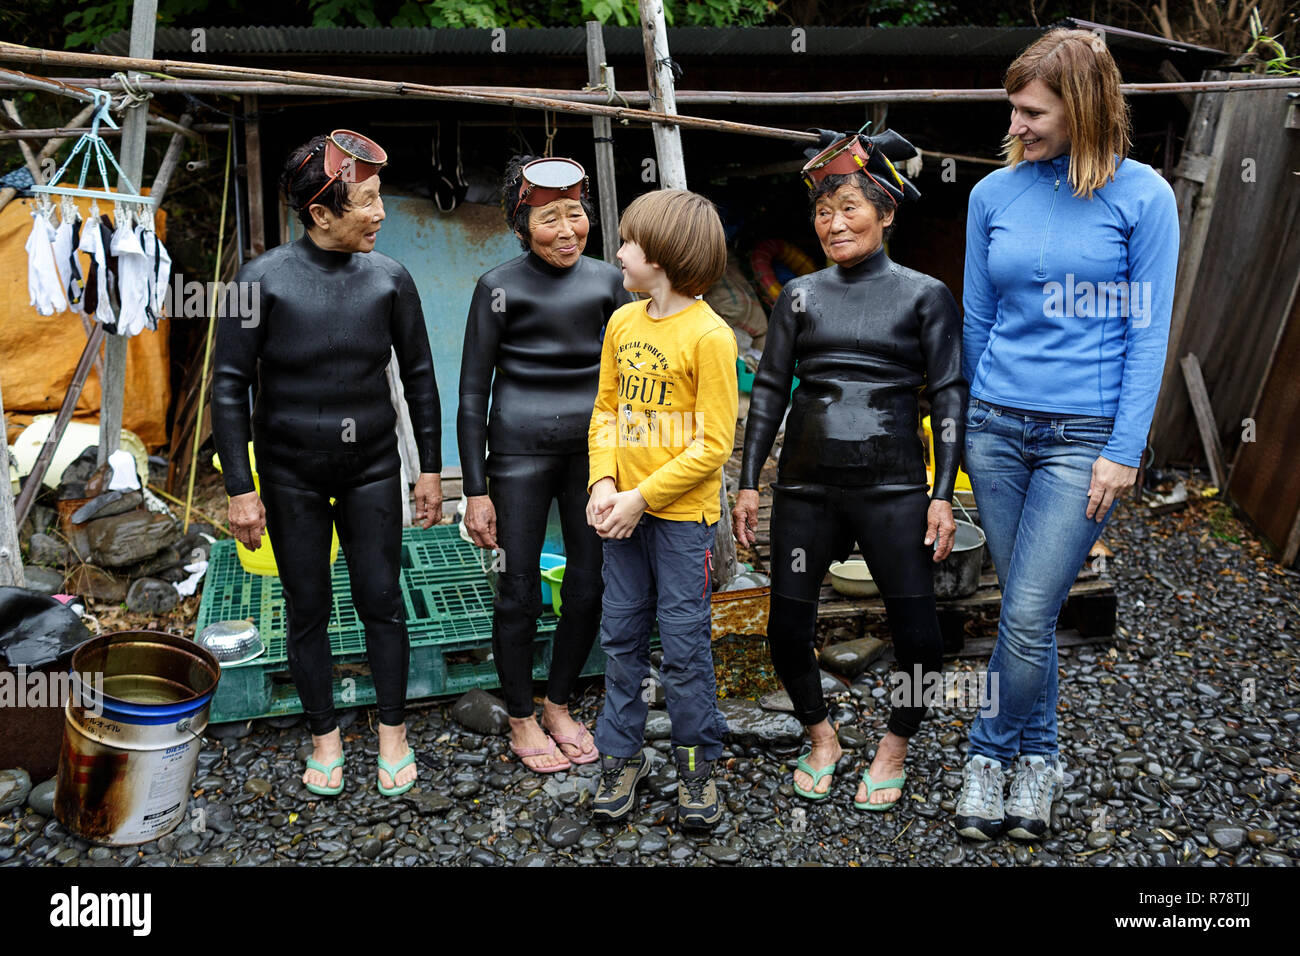 Mother and son making friends and taking a group photo with women Ama  divers, Mie, Japan Stock Photo - Alamy